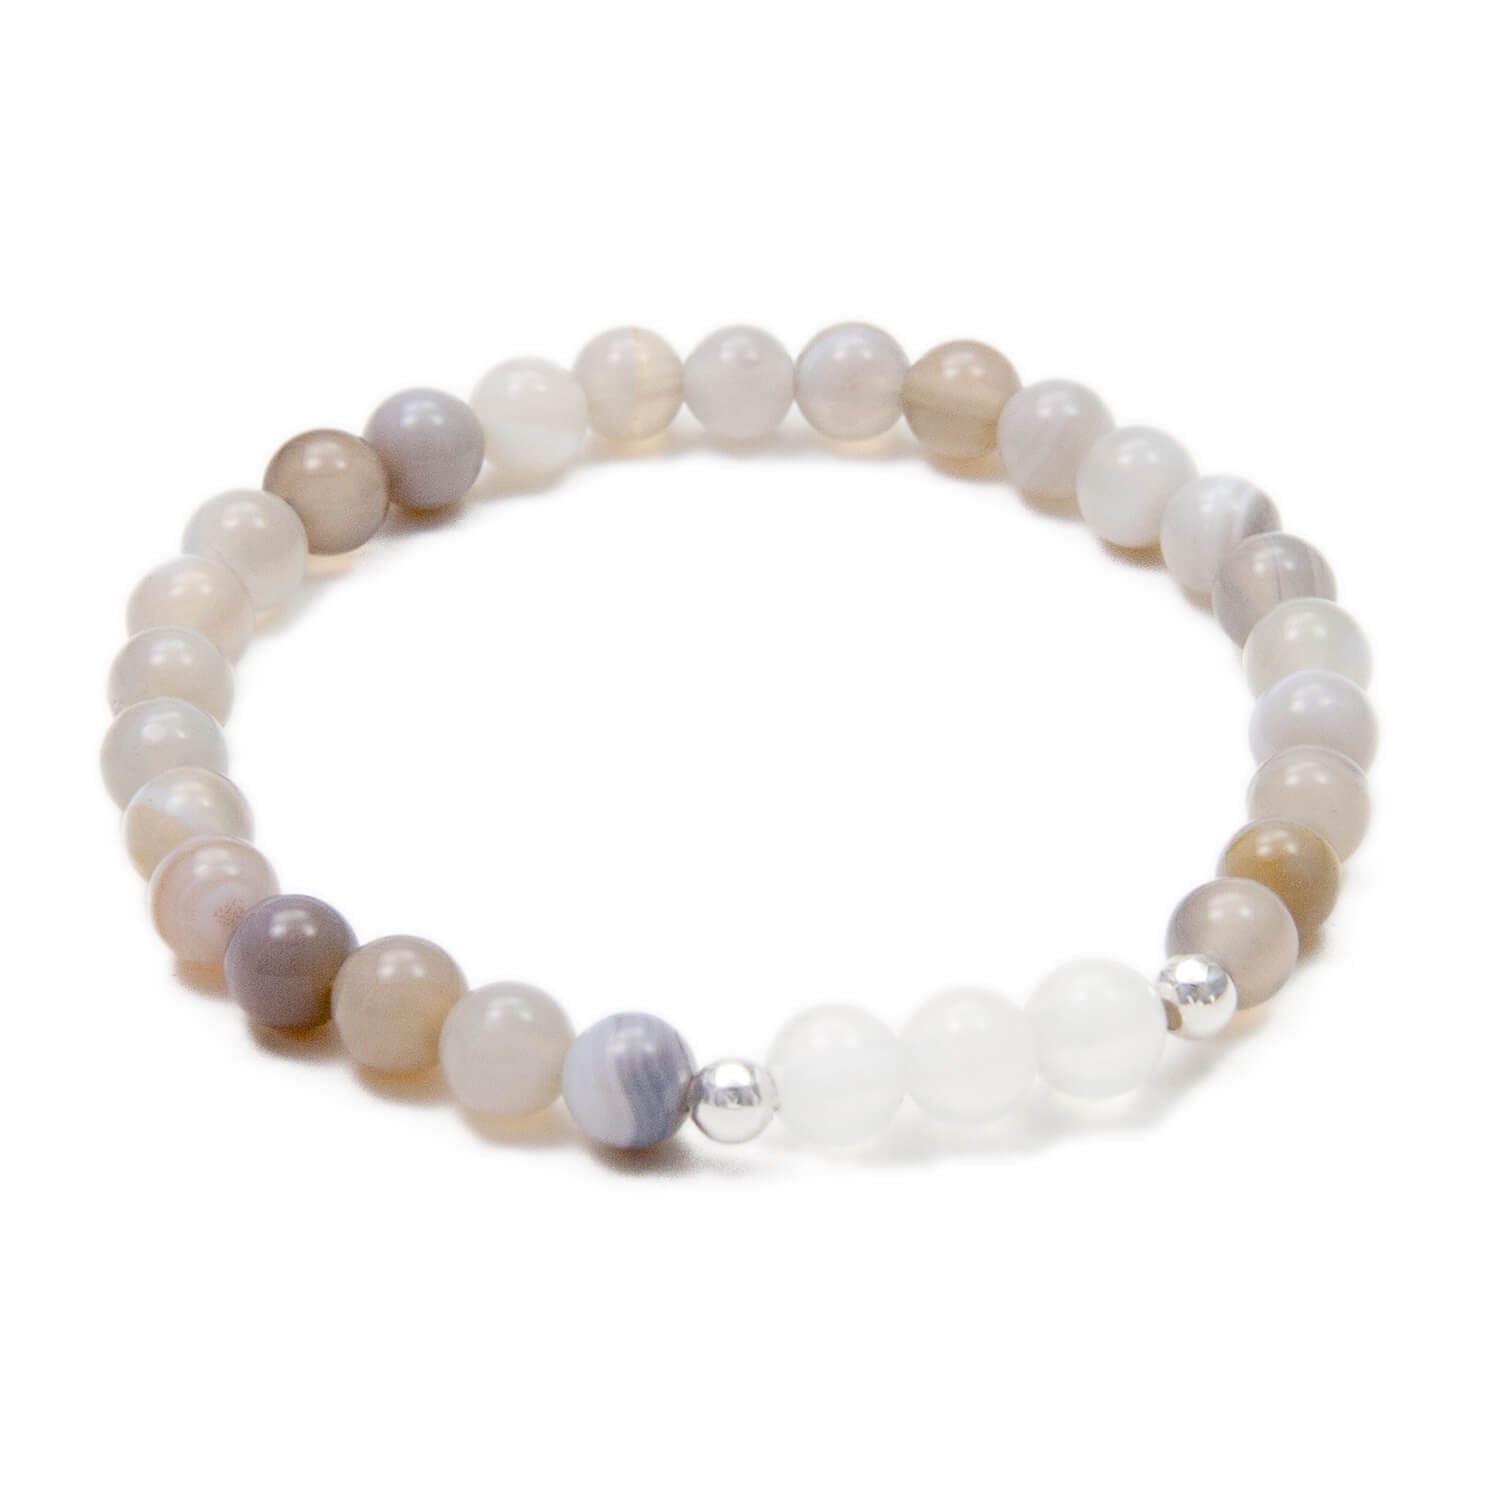 Agate Bracelet with Selenite, Harmony and Grounding